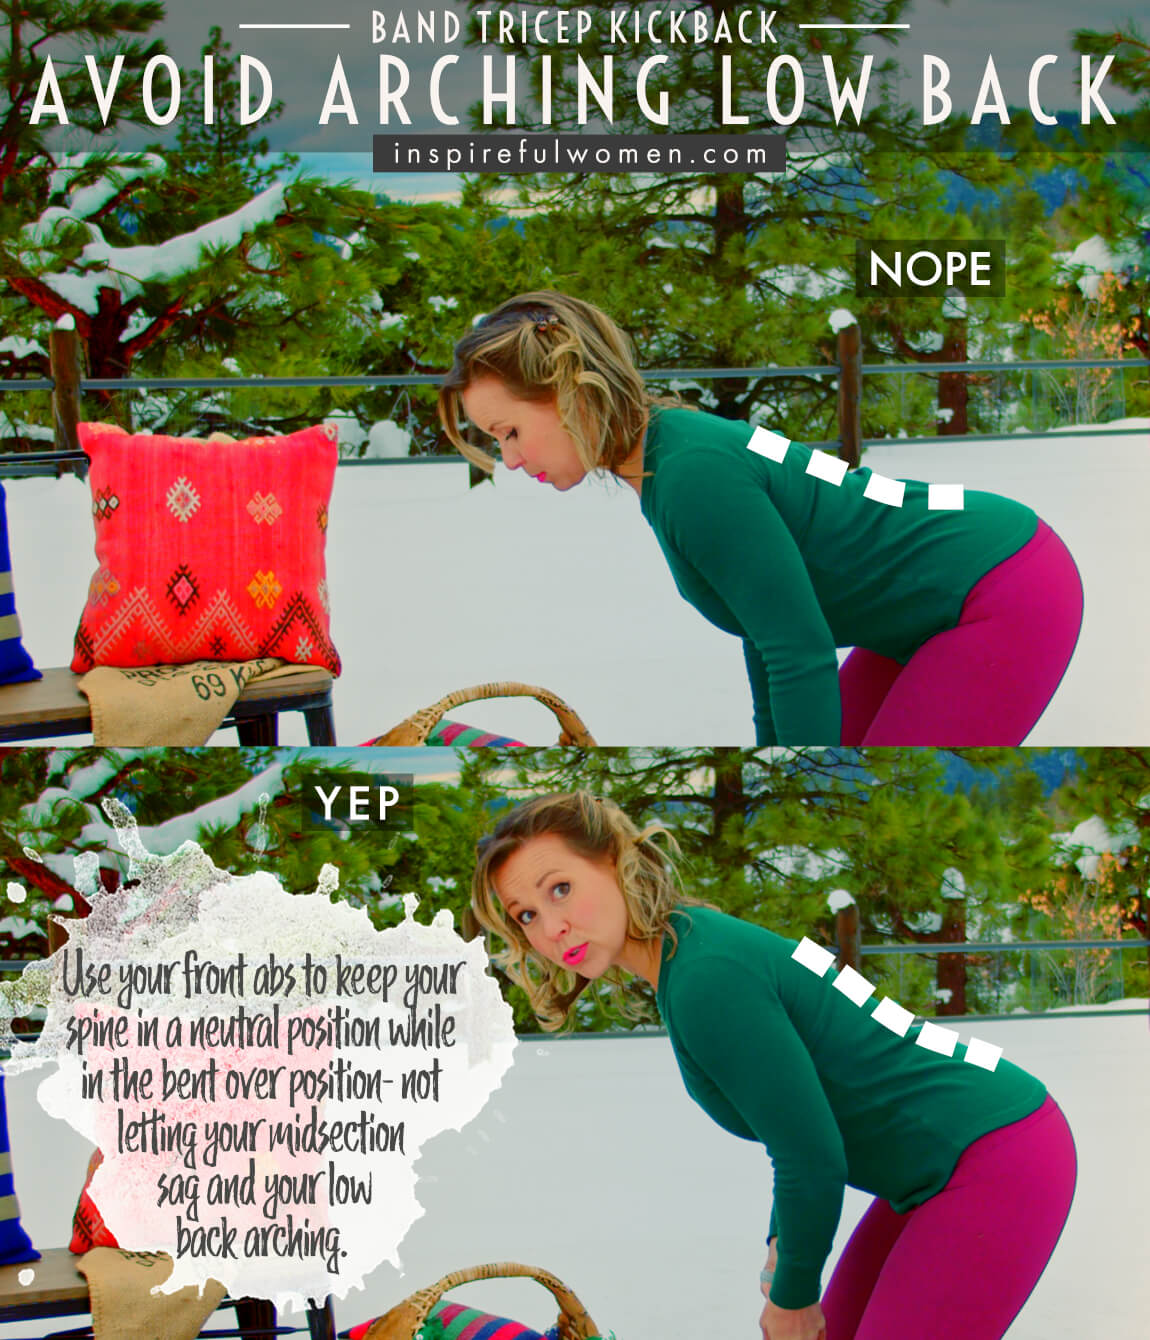 avoid-arching-low-back-resistance-band-triceps-kickbacks-standing-bent-over-proper-form